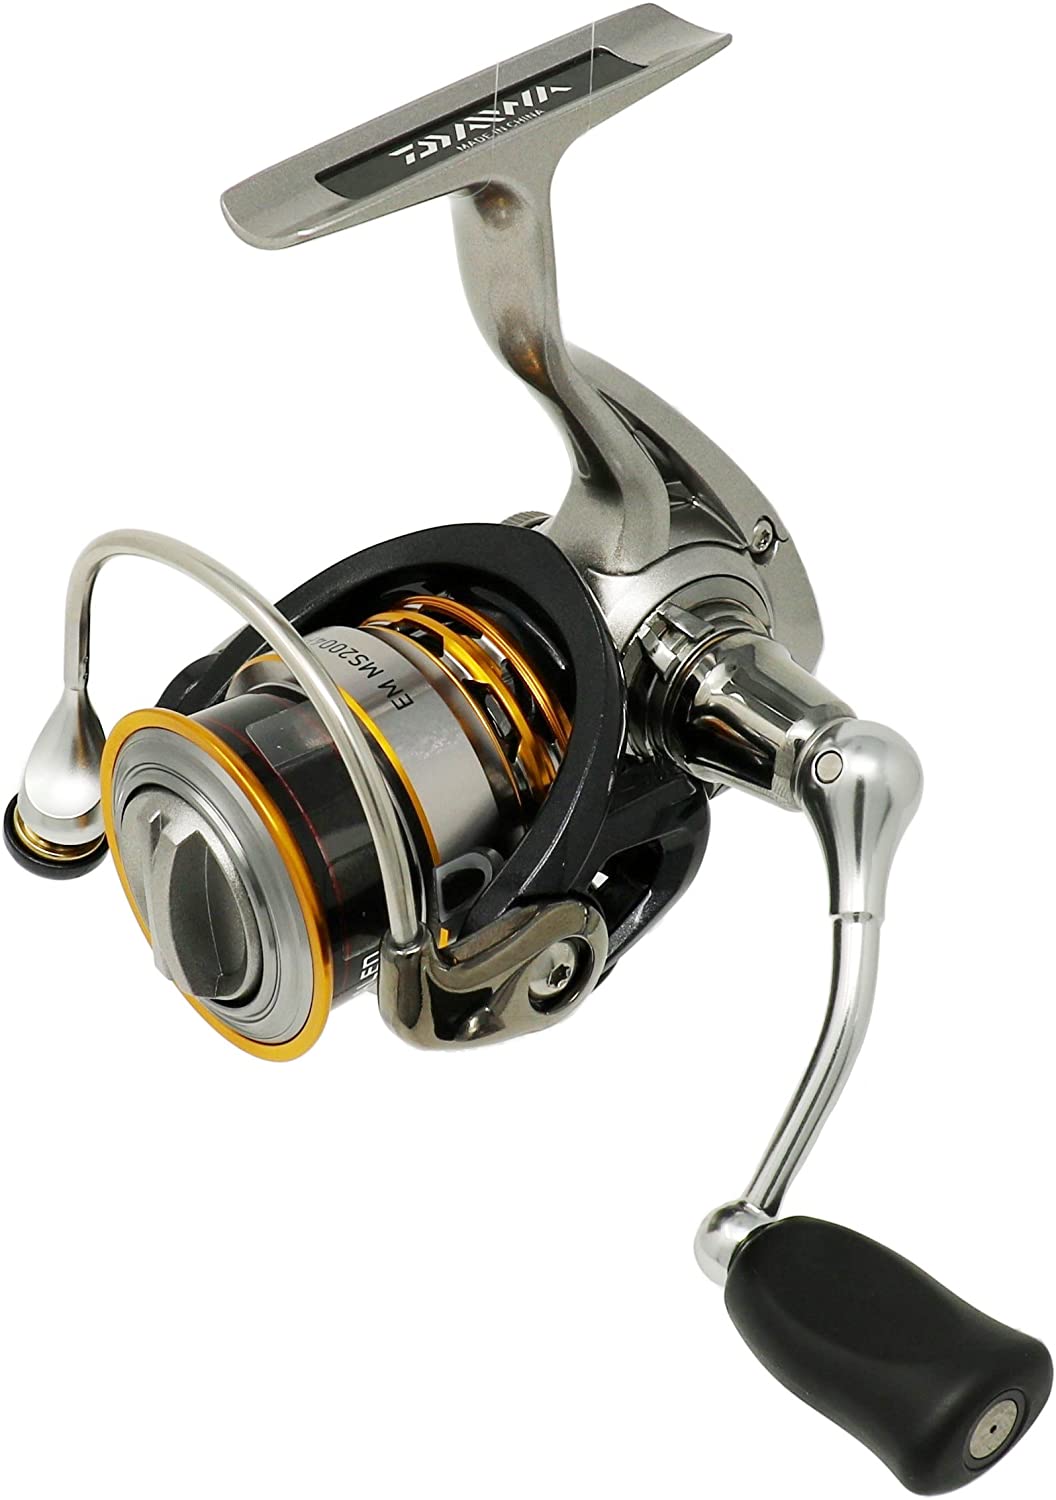 DAIWA Spinning Reel 16 EM MS 2004H (2000 size) - Discovery Japan Mall